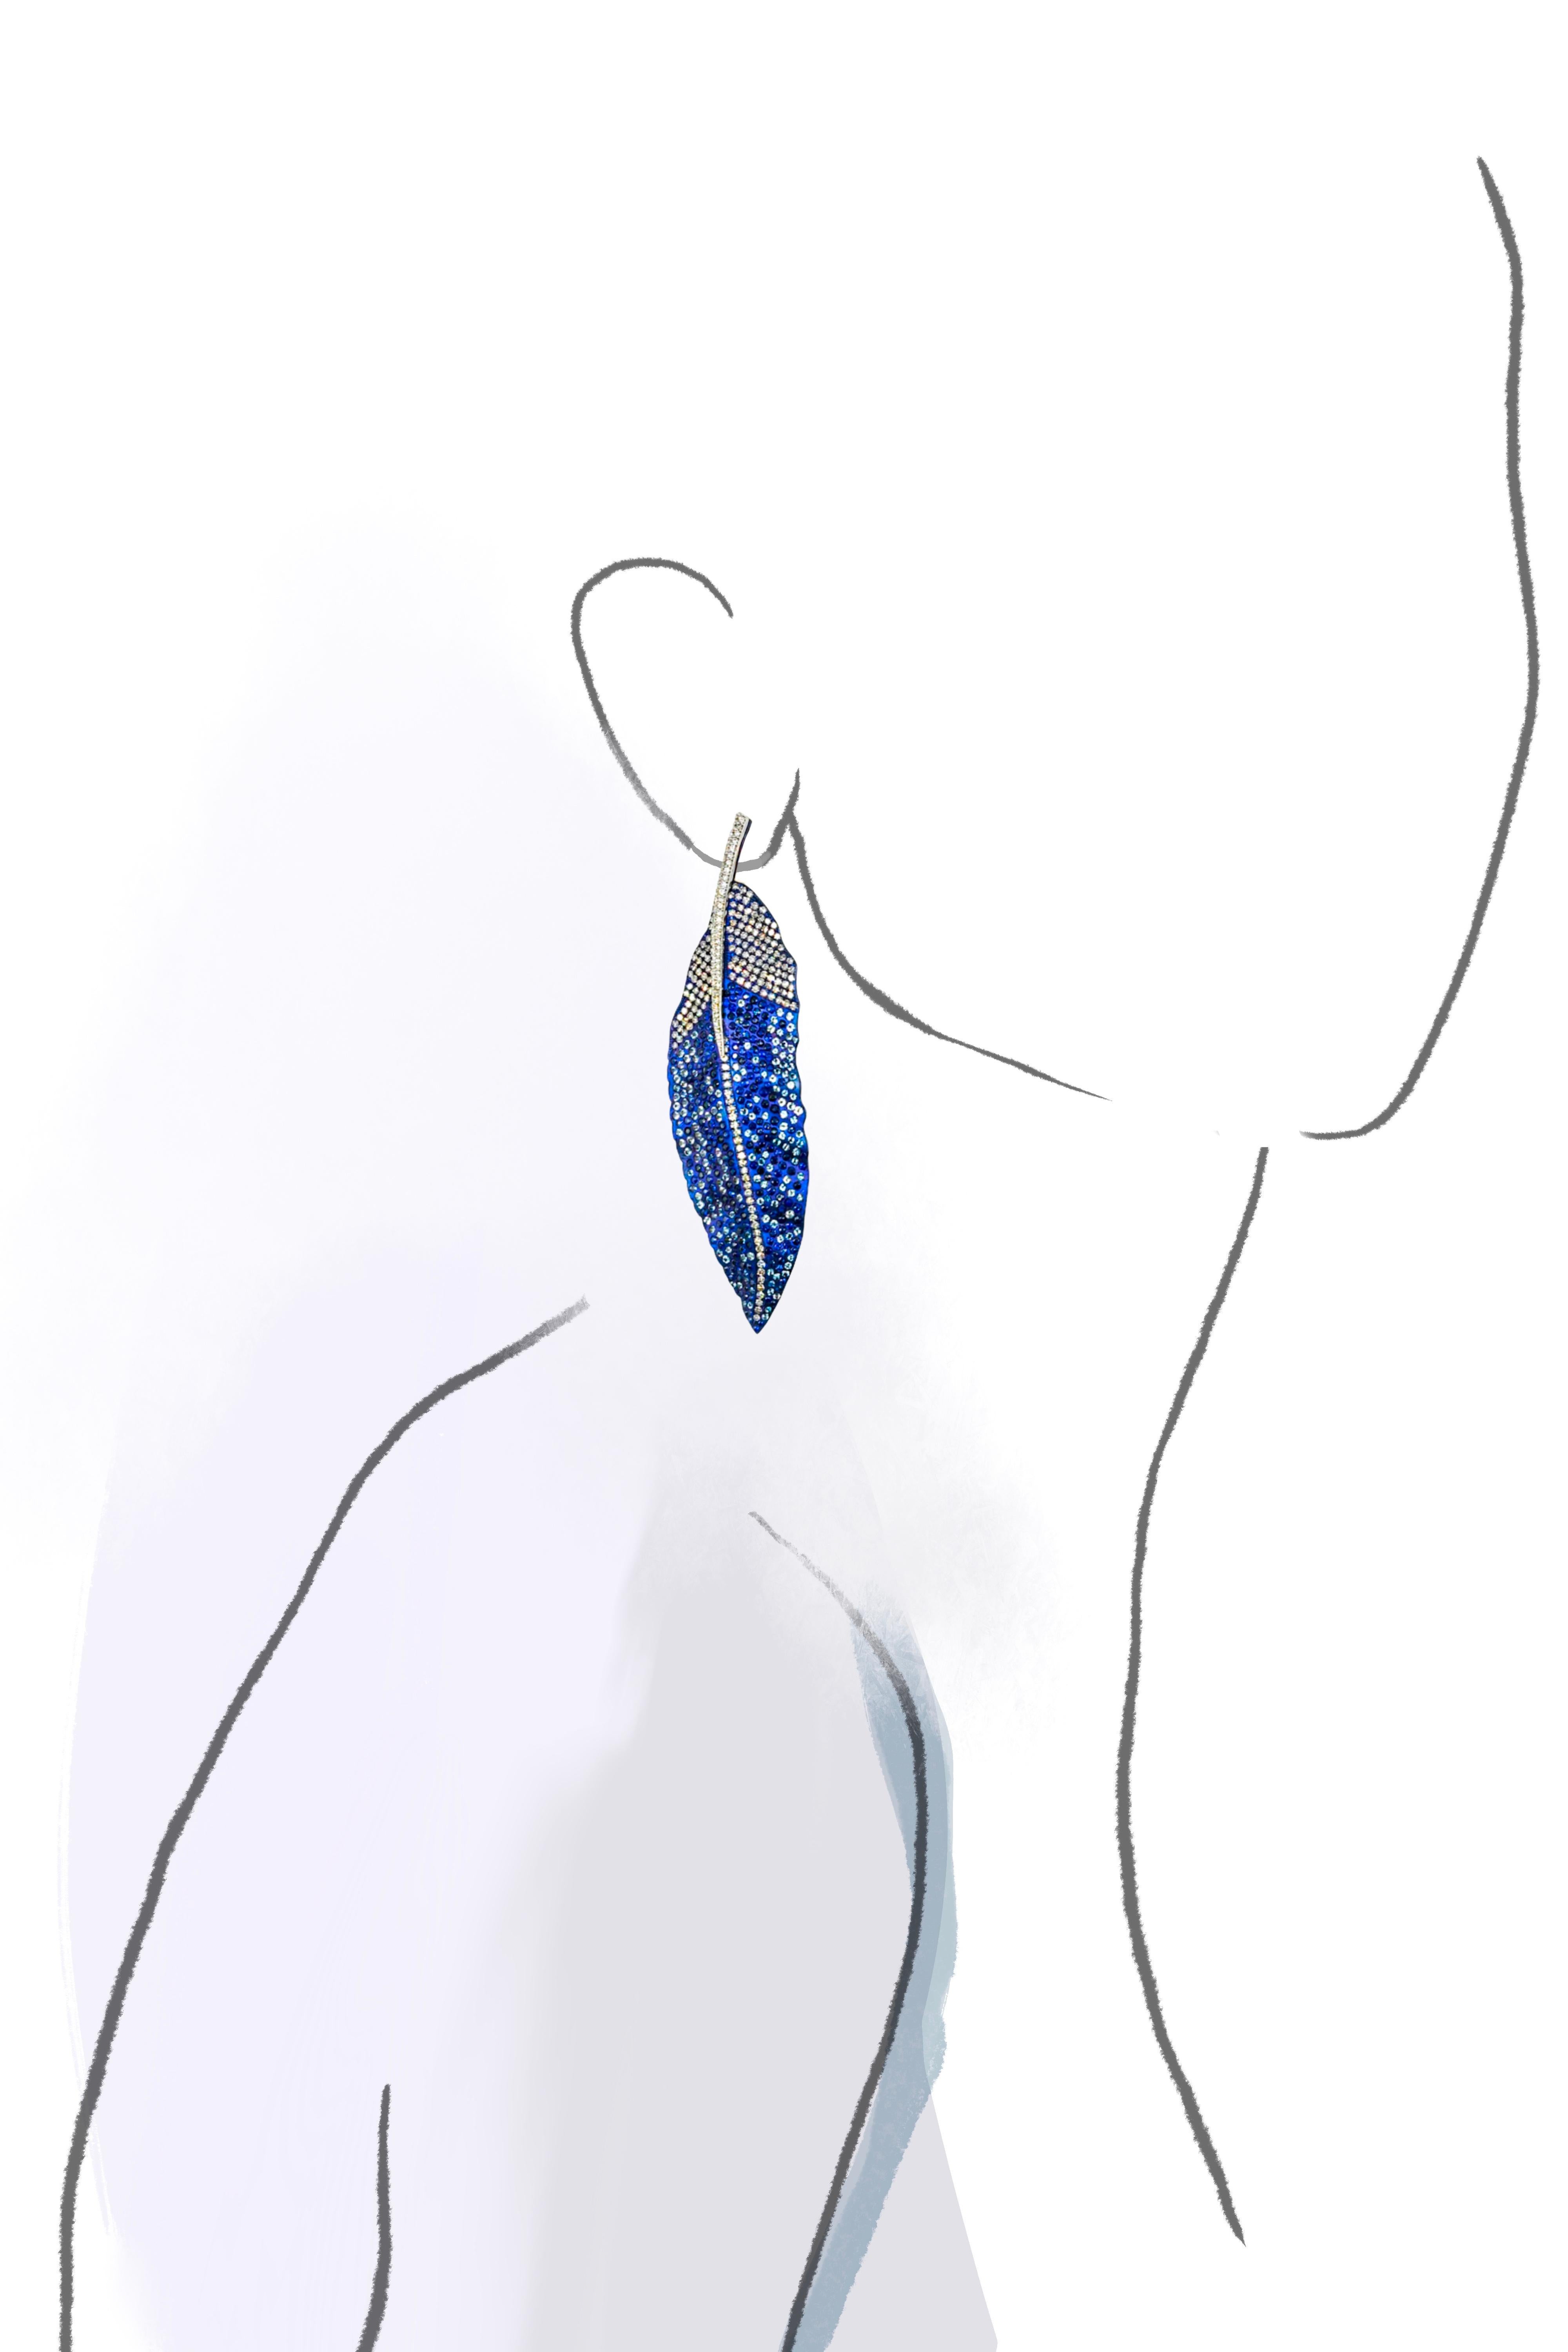 Adorn yourself with the beauty of nature with our handcrafted Blue Jay feather earrings. Set with an impressive 1248 gems, including 482 diamonds weighing 4.66 carats, 438 blue sapphires weighing 6.92 carats and 328 aquamarines weighing 3.66 carats.